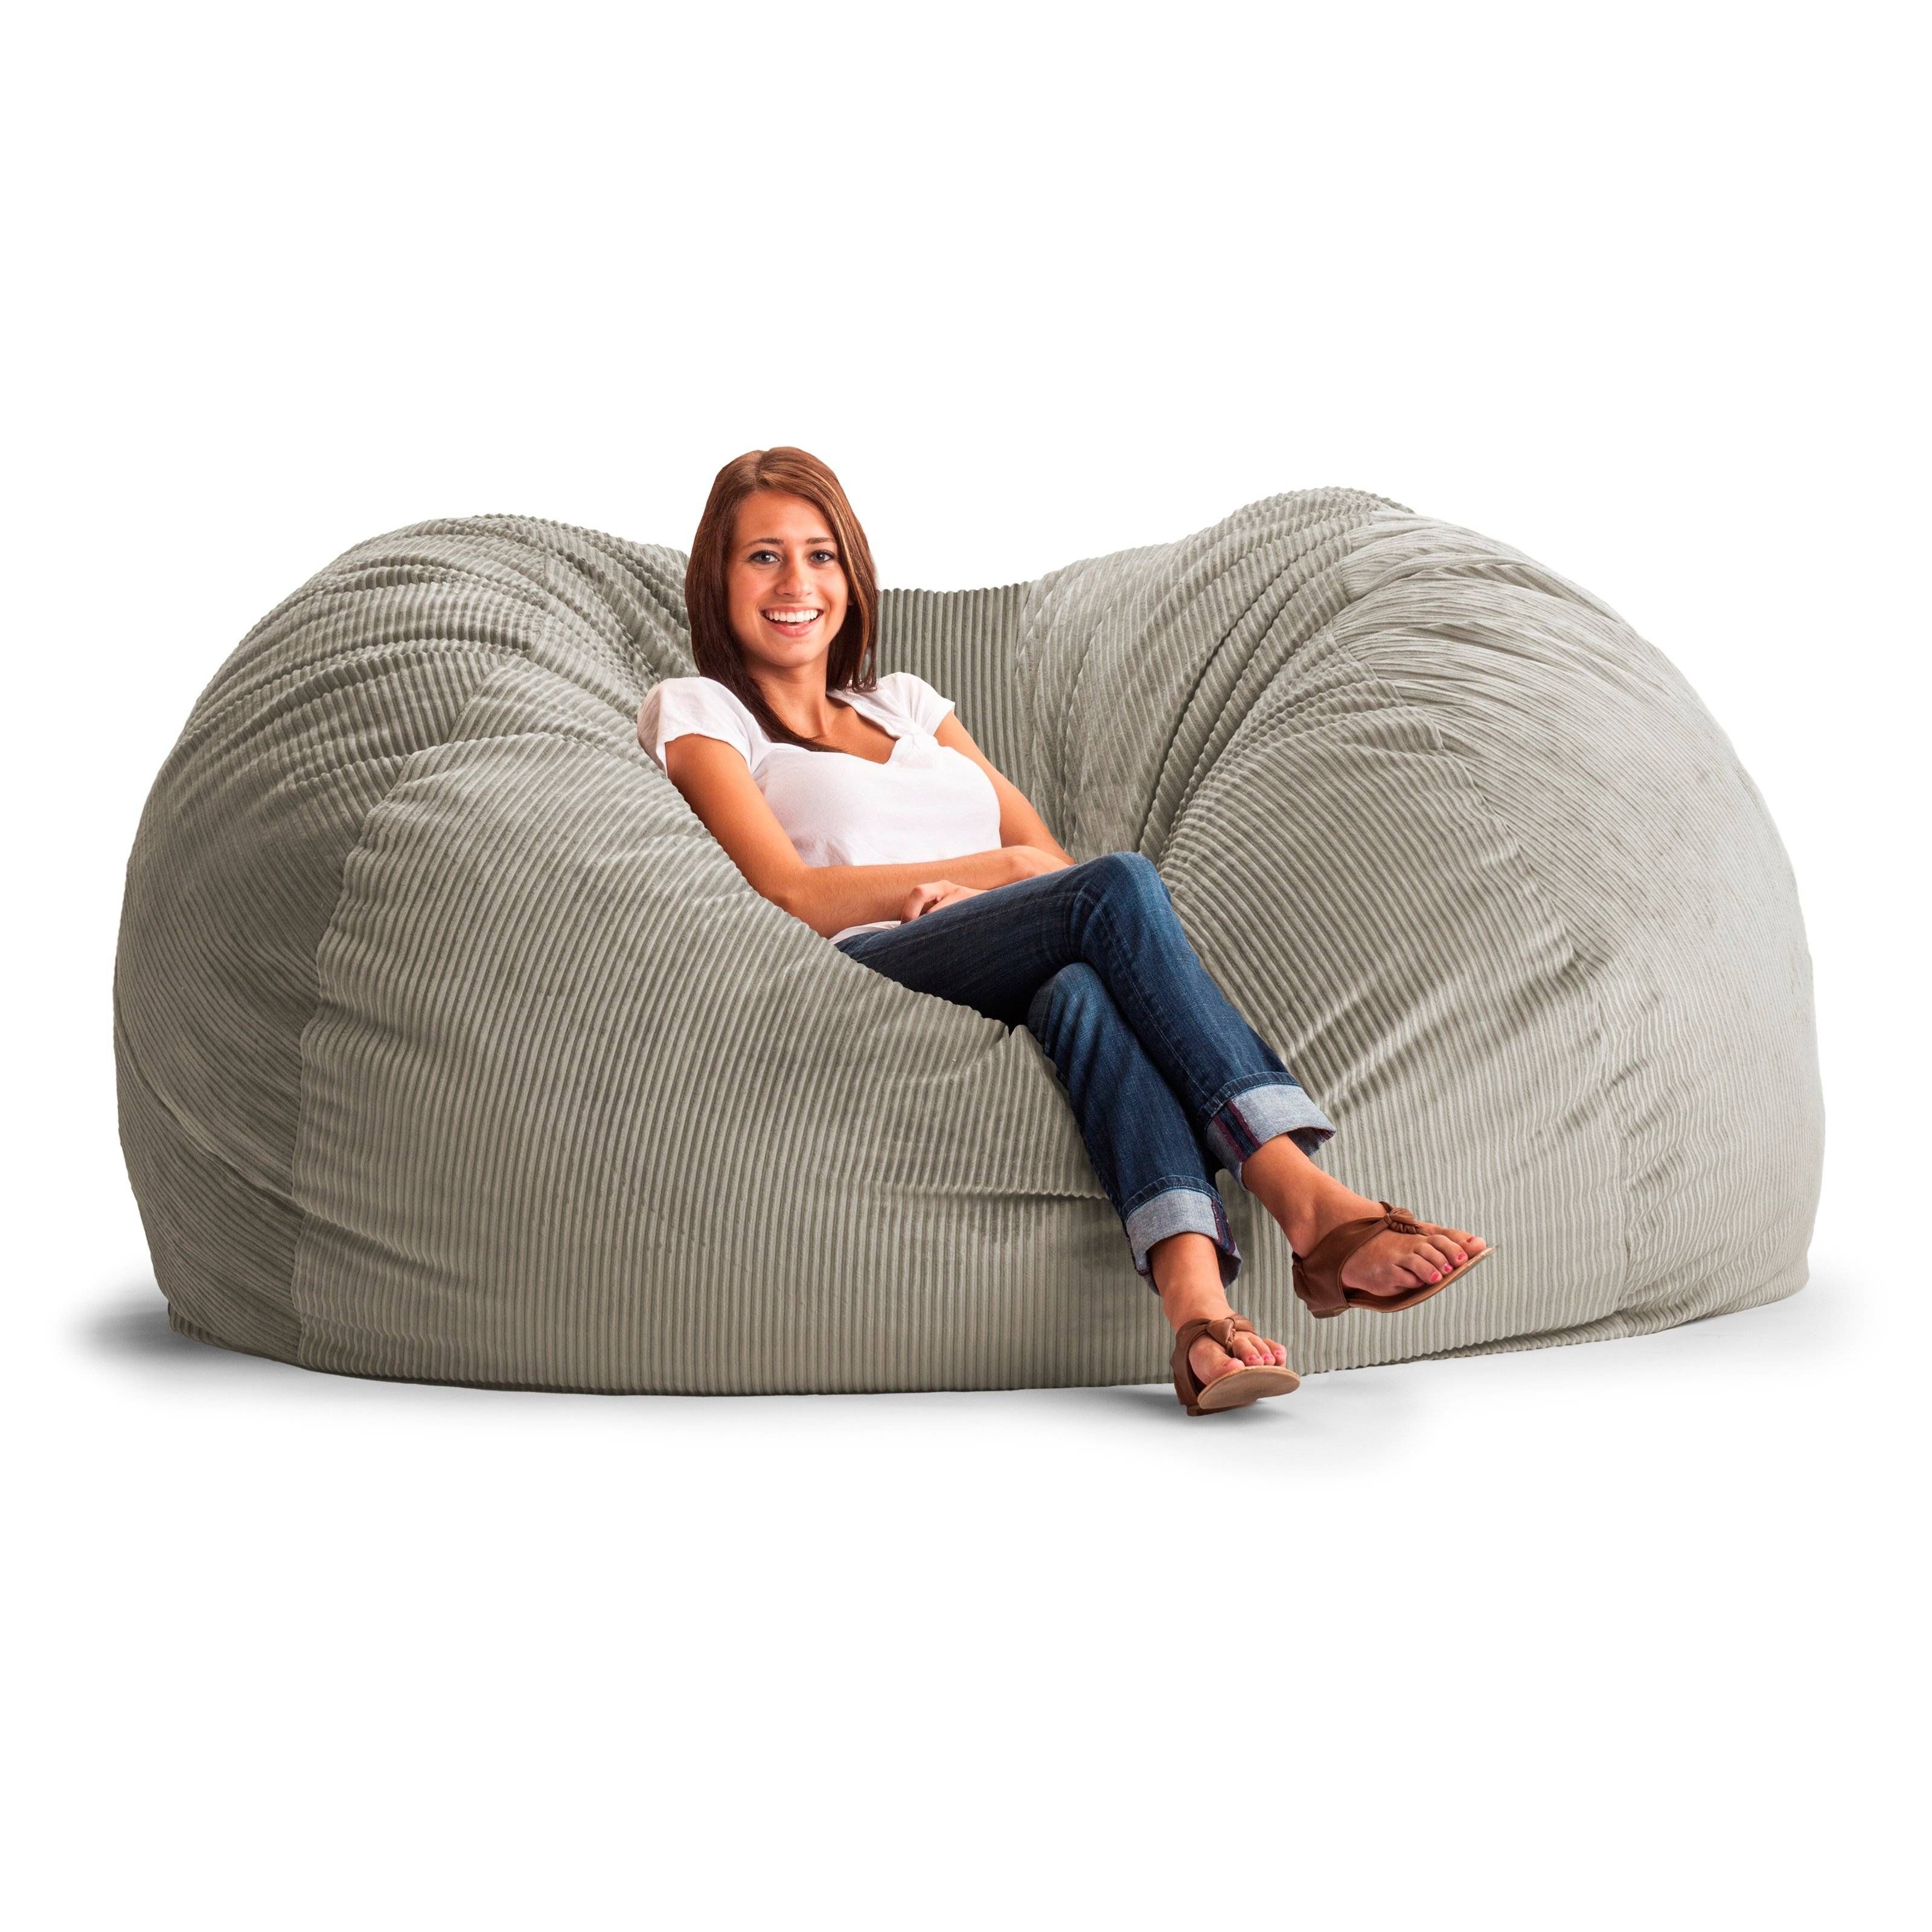 Fuf 7 Ft Xxl Wide Wale Corduroy Bean Bag Sofa Hayneedle With Bean Bag Sofas And Chairs 